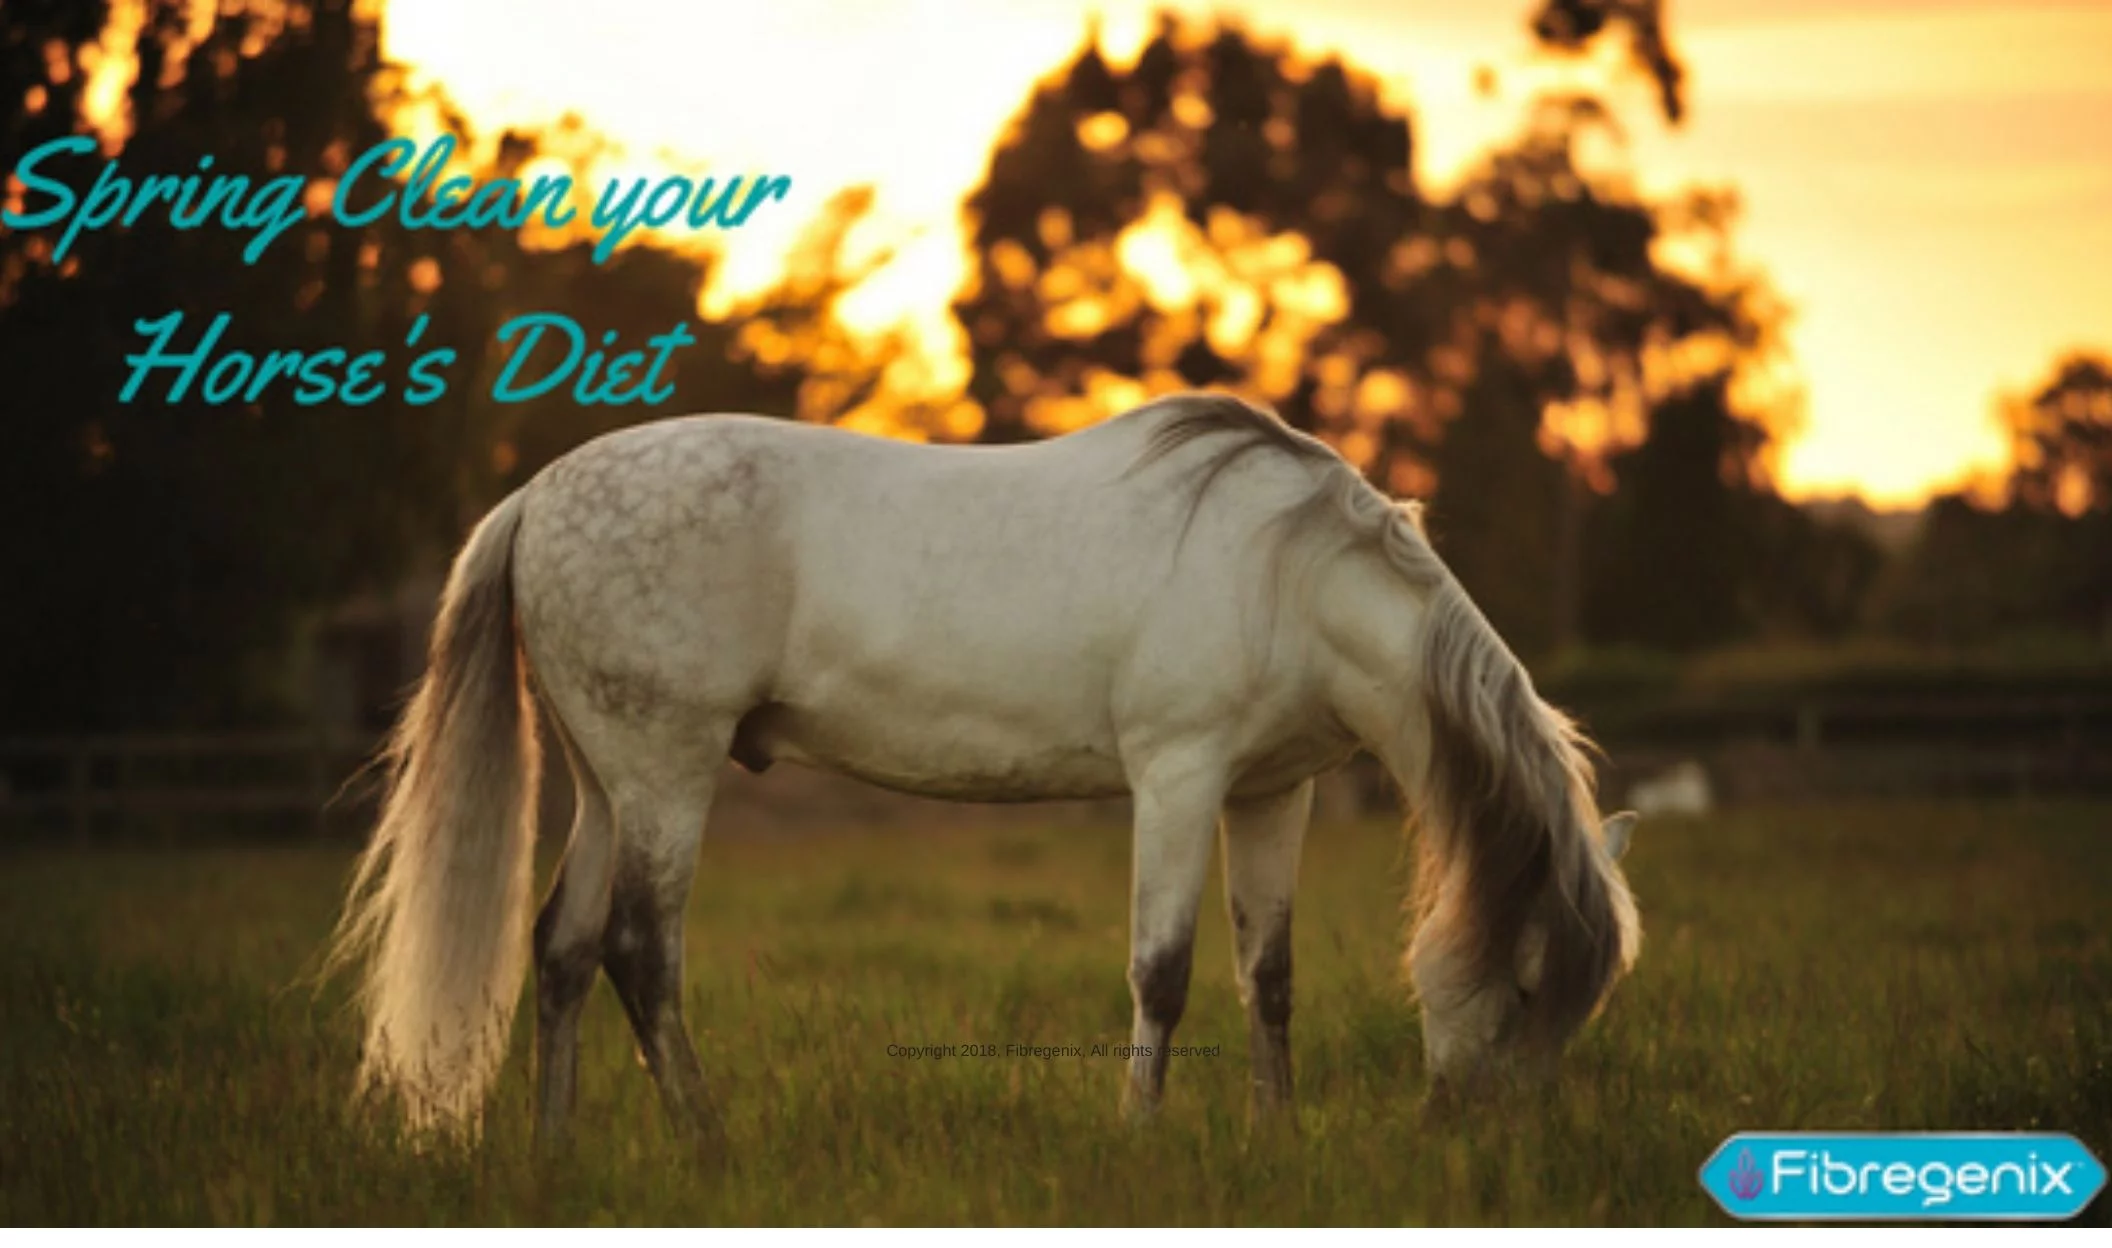 Spring Clean Your Horse’s Diet